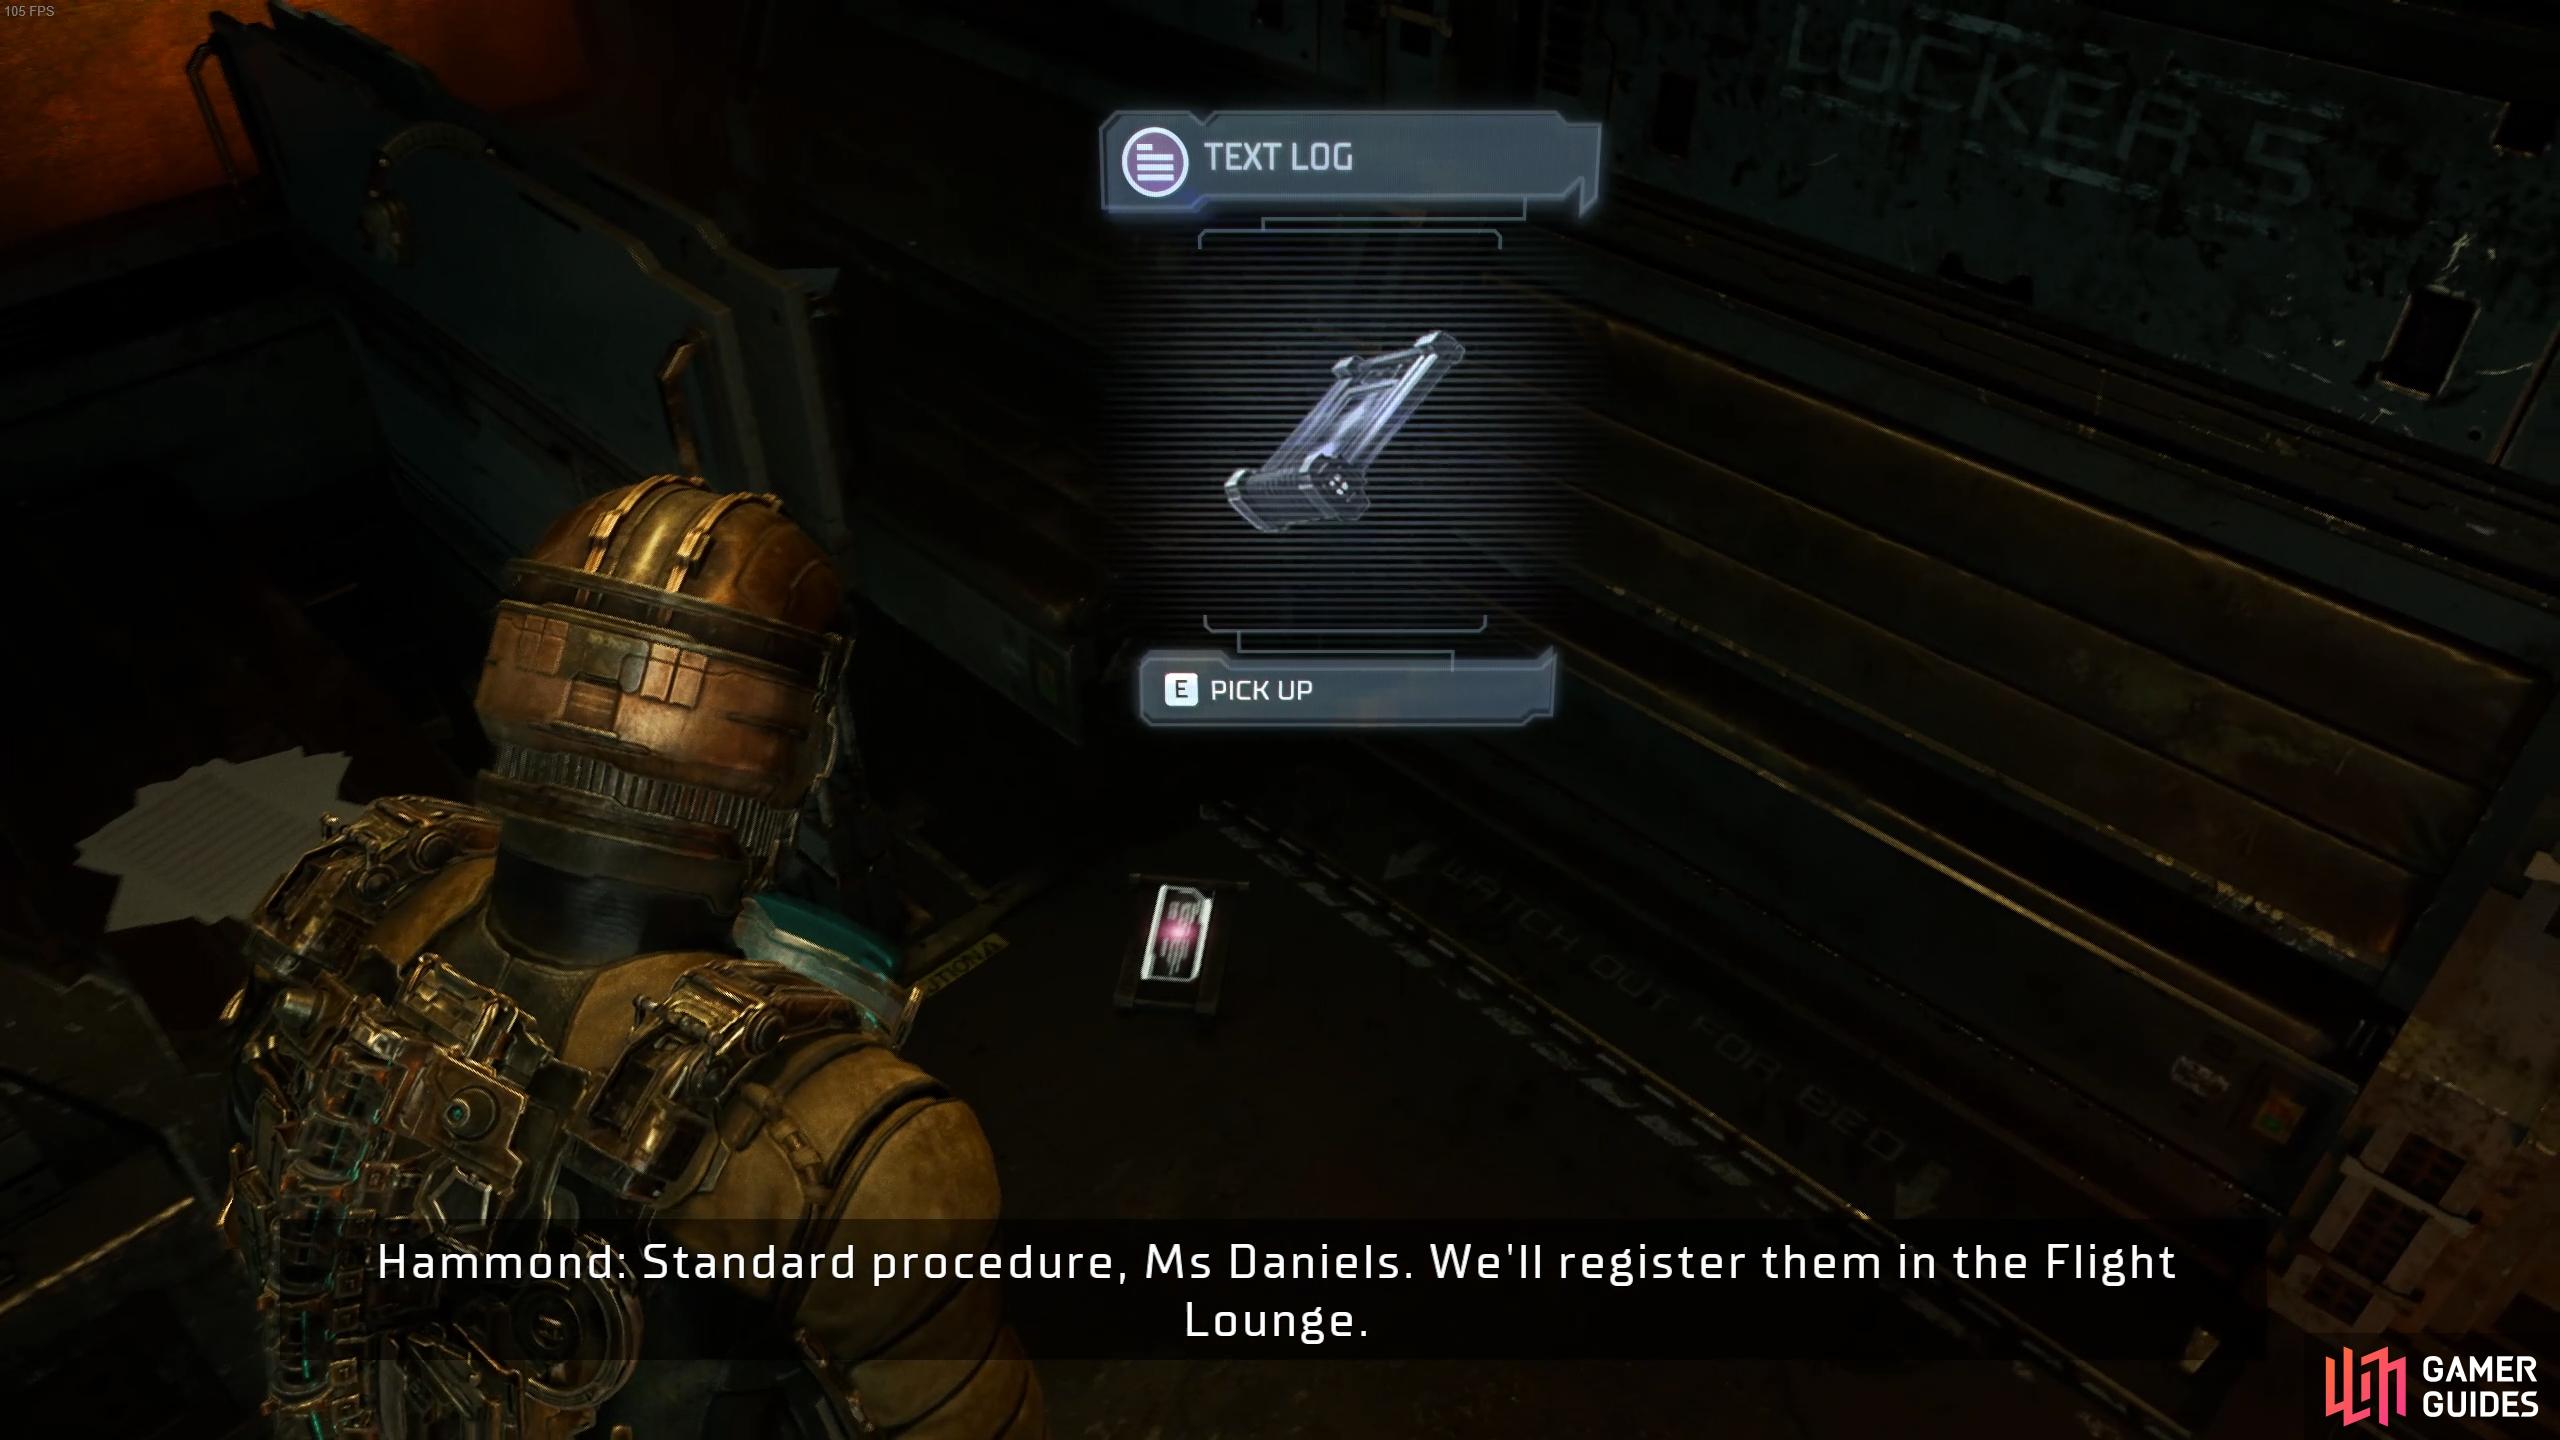 You'll find the Background Request log inside the USG Kellion ship, where you start the chapter.